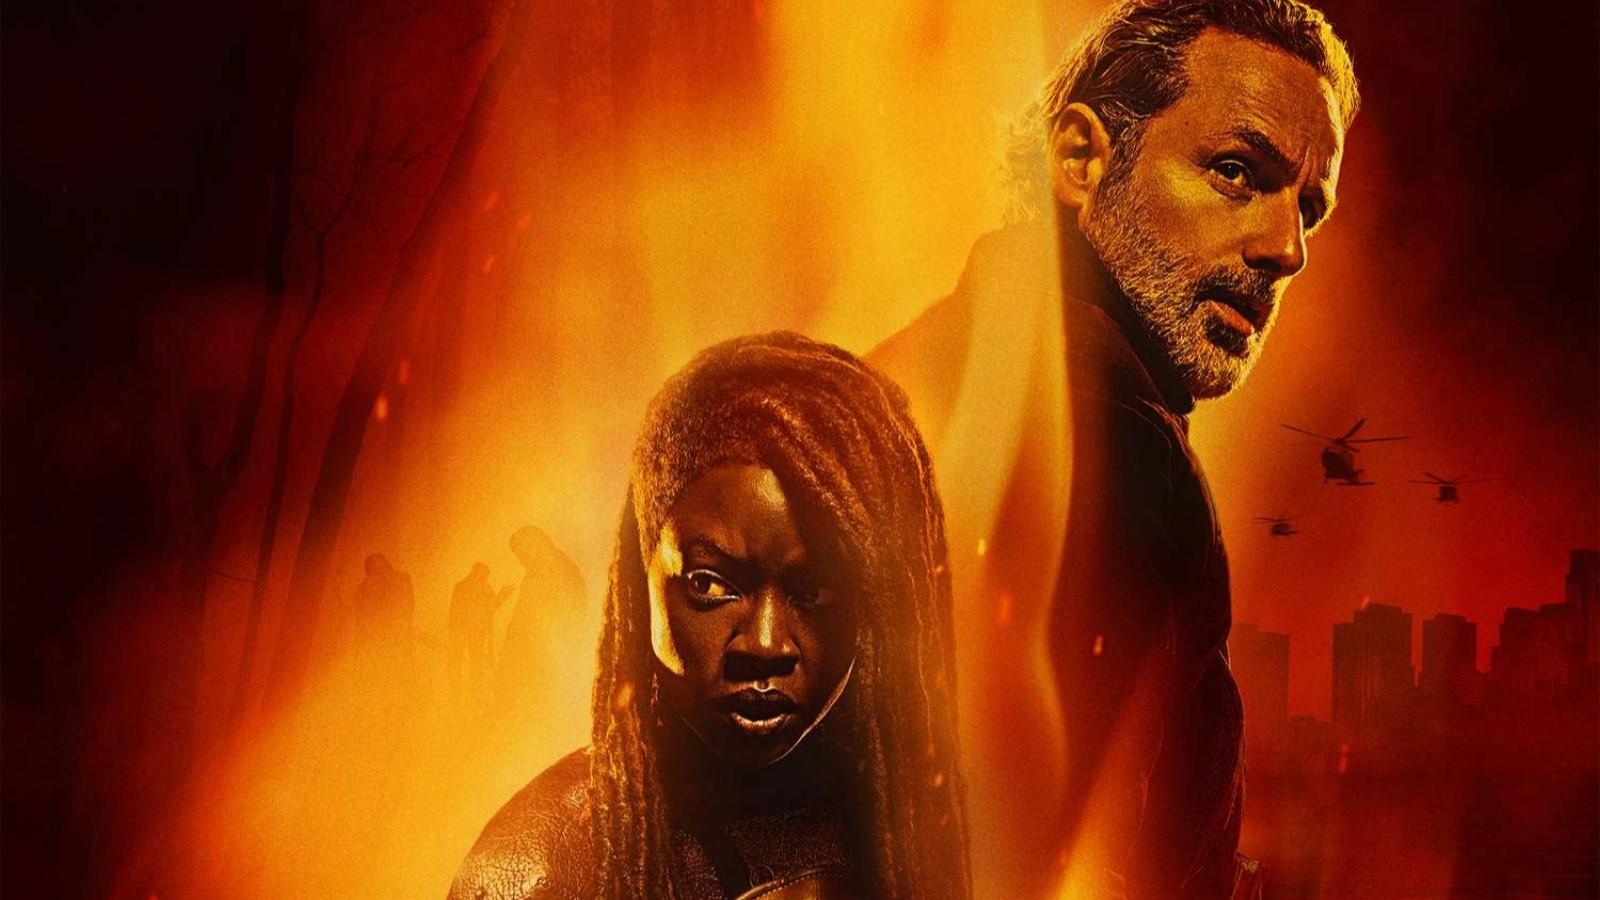 The official poster for The Walking Dead: The Ones Who Live, with Rick and Michonne against an orange backgrouund